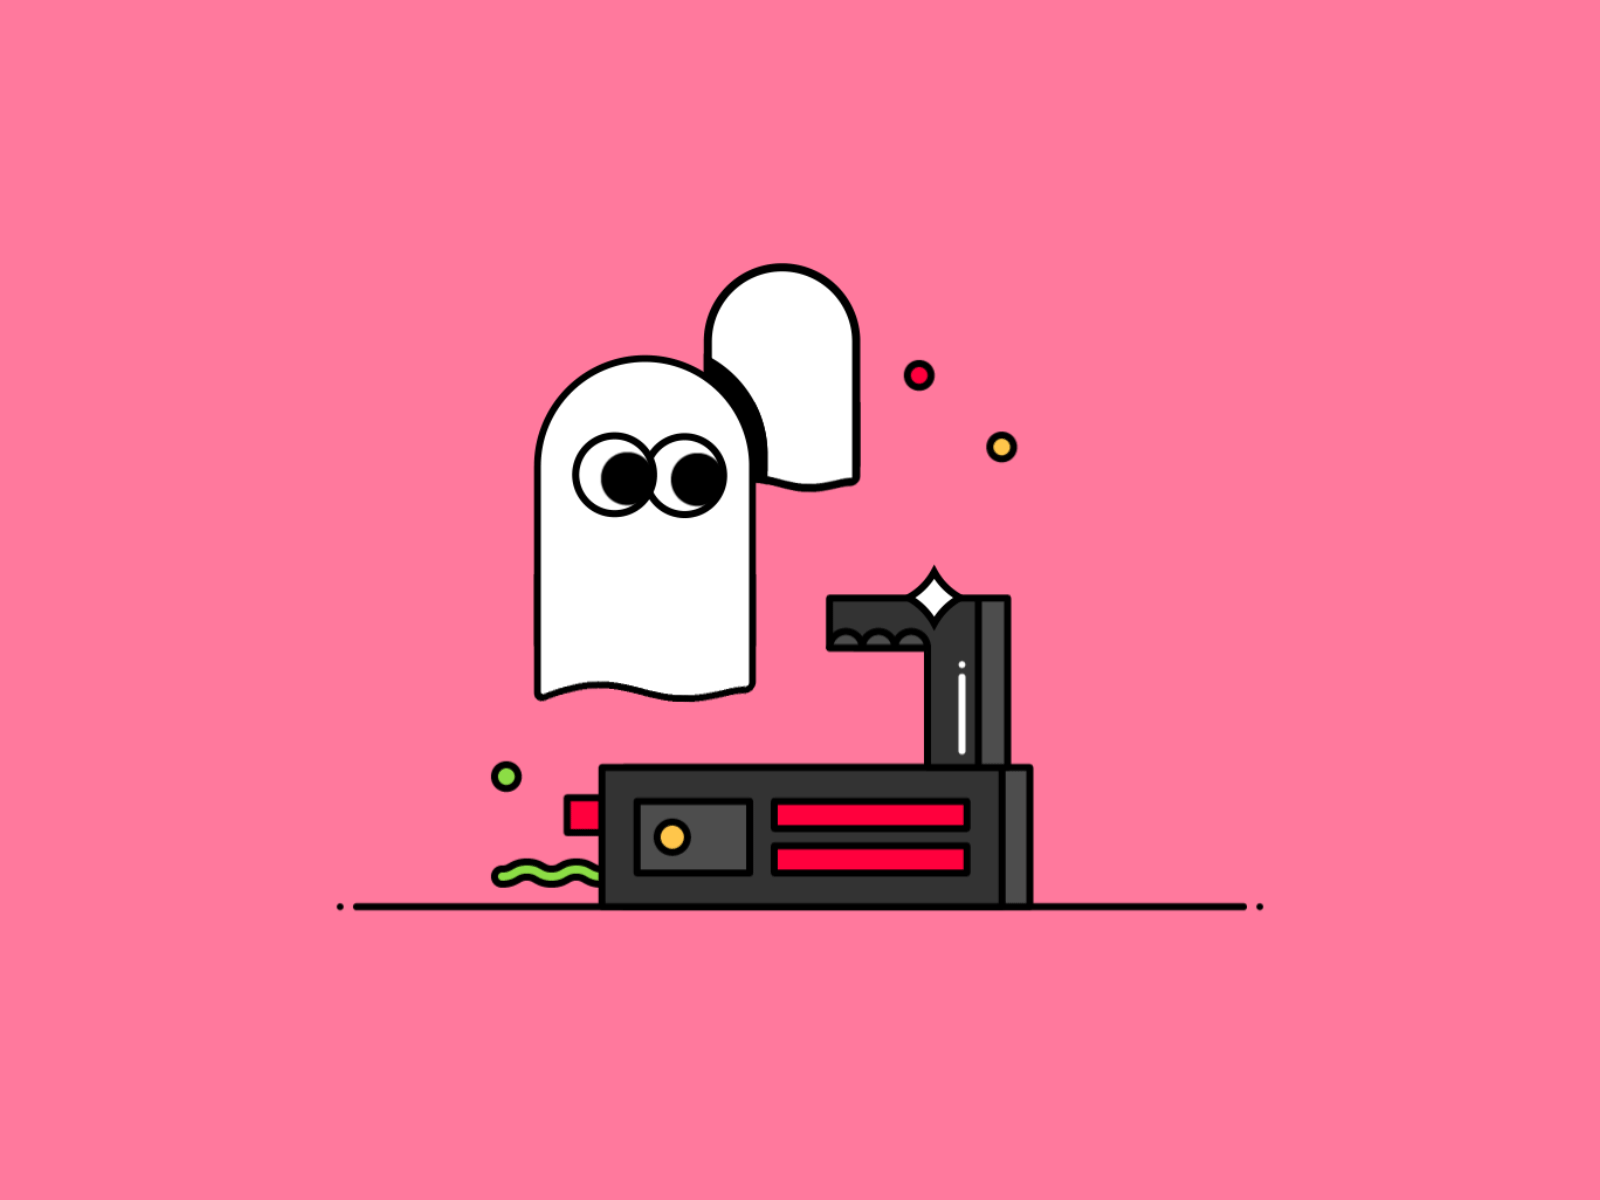 G is for Ghostbusters 👻 🤜🏻